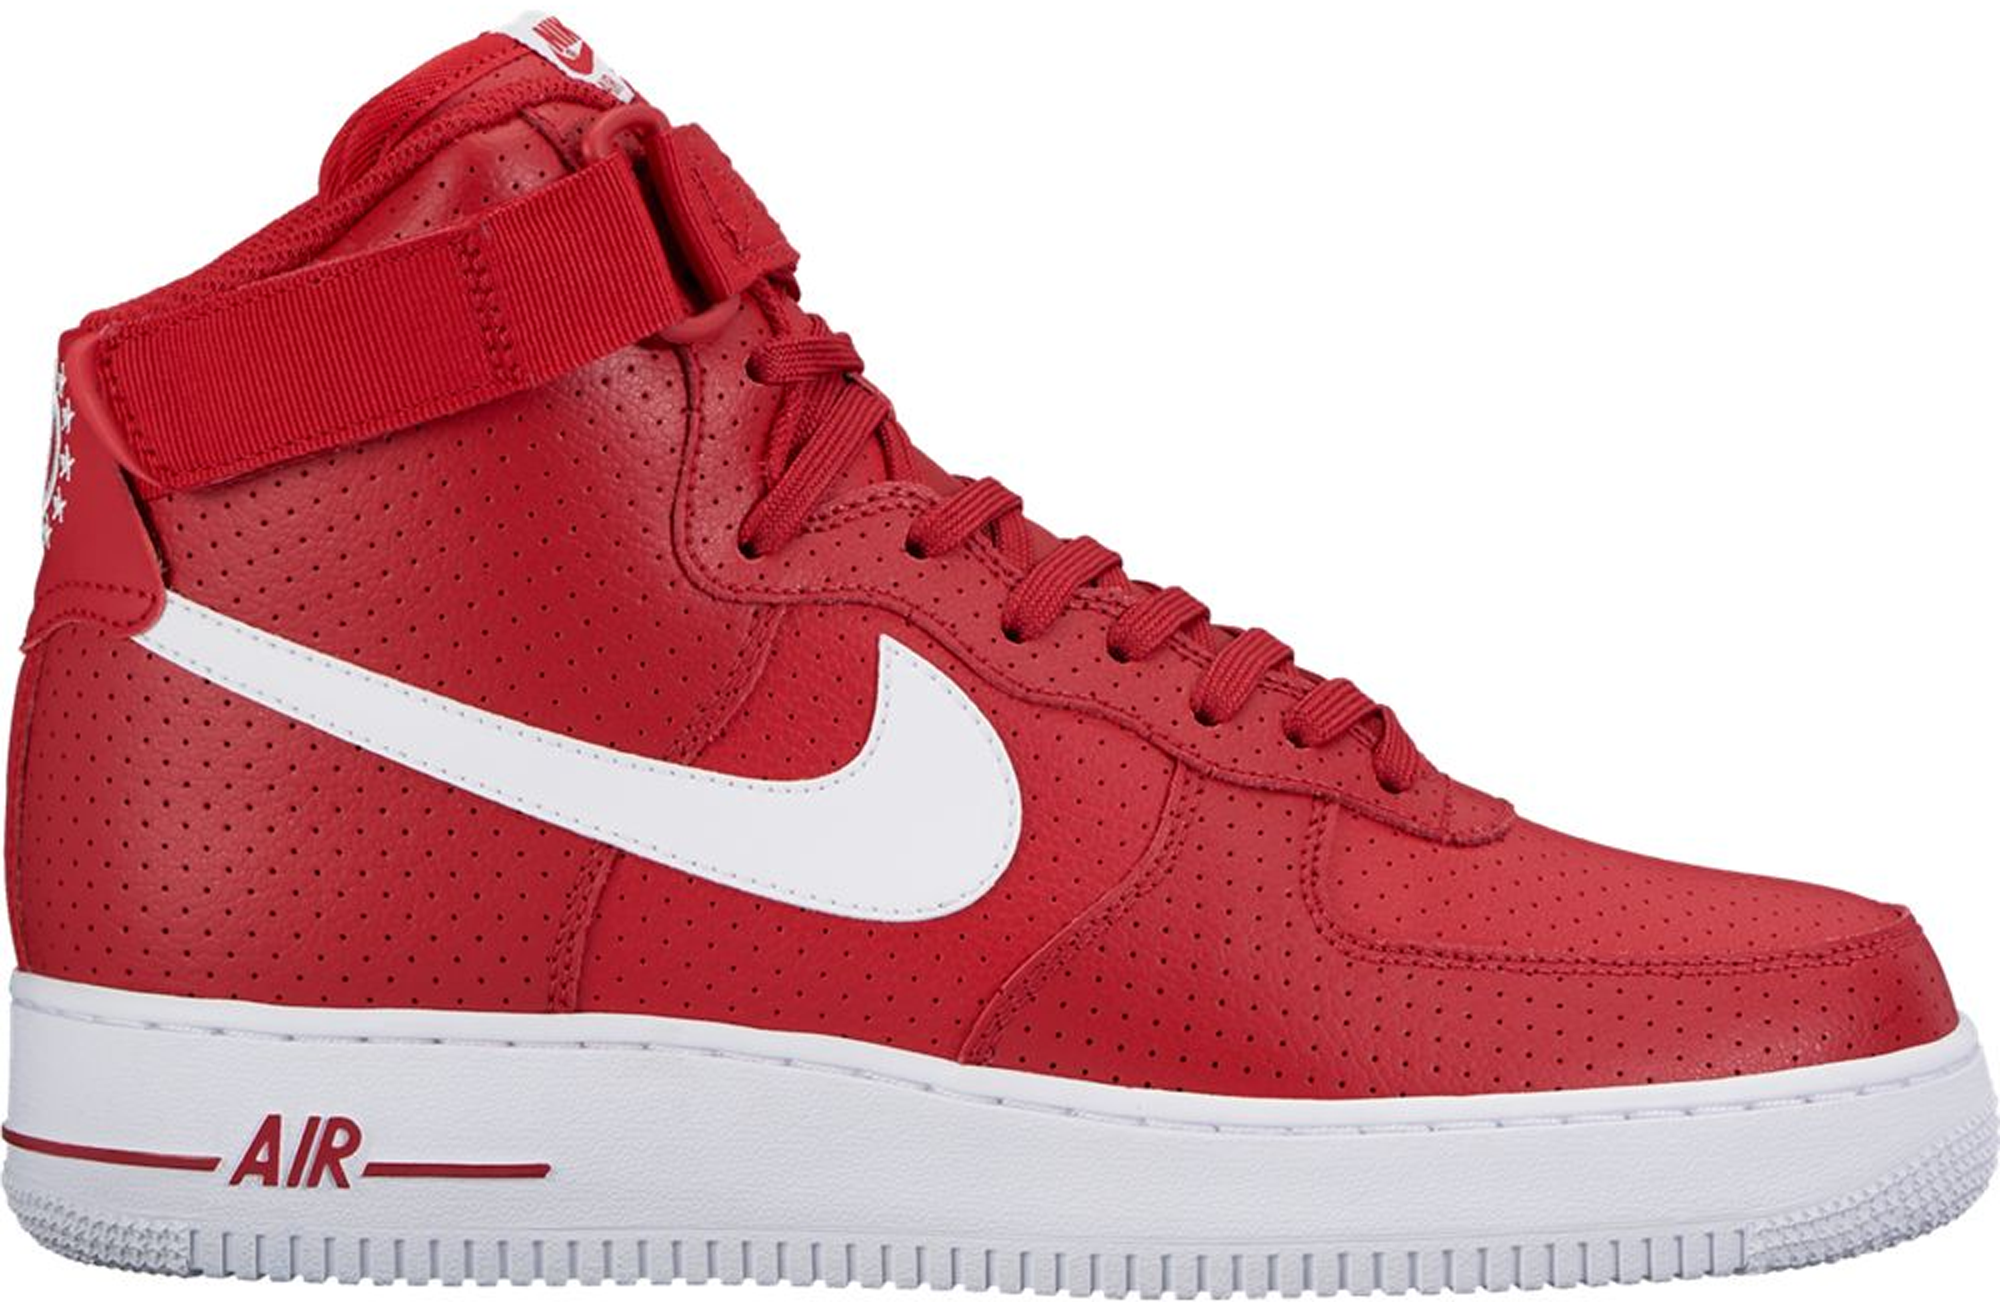 red air forces high top